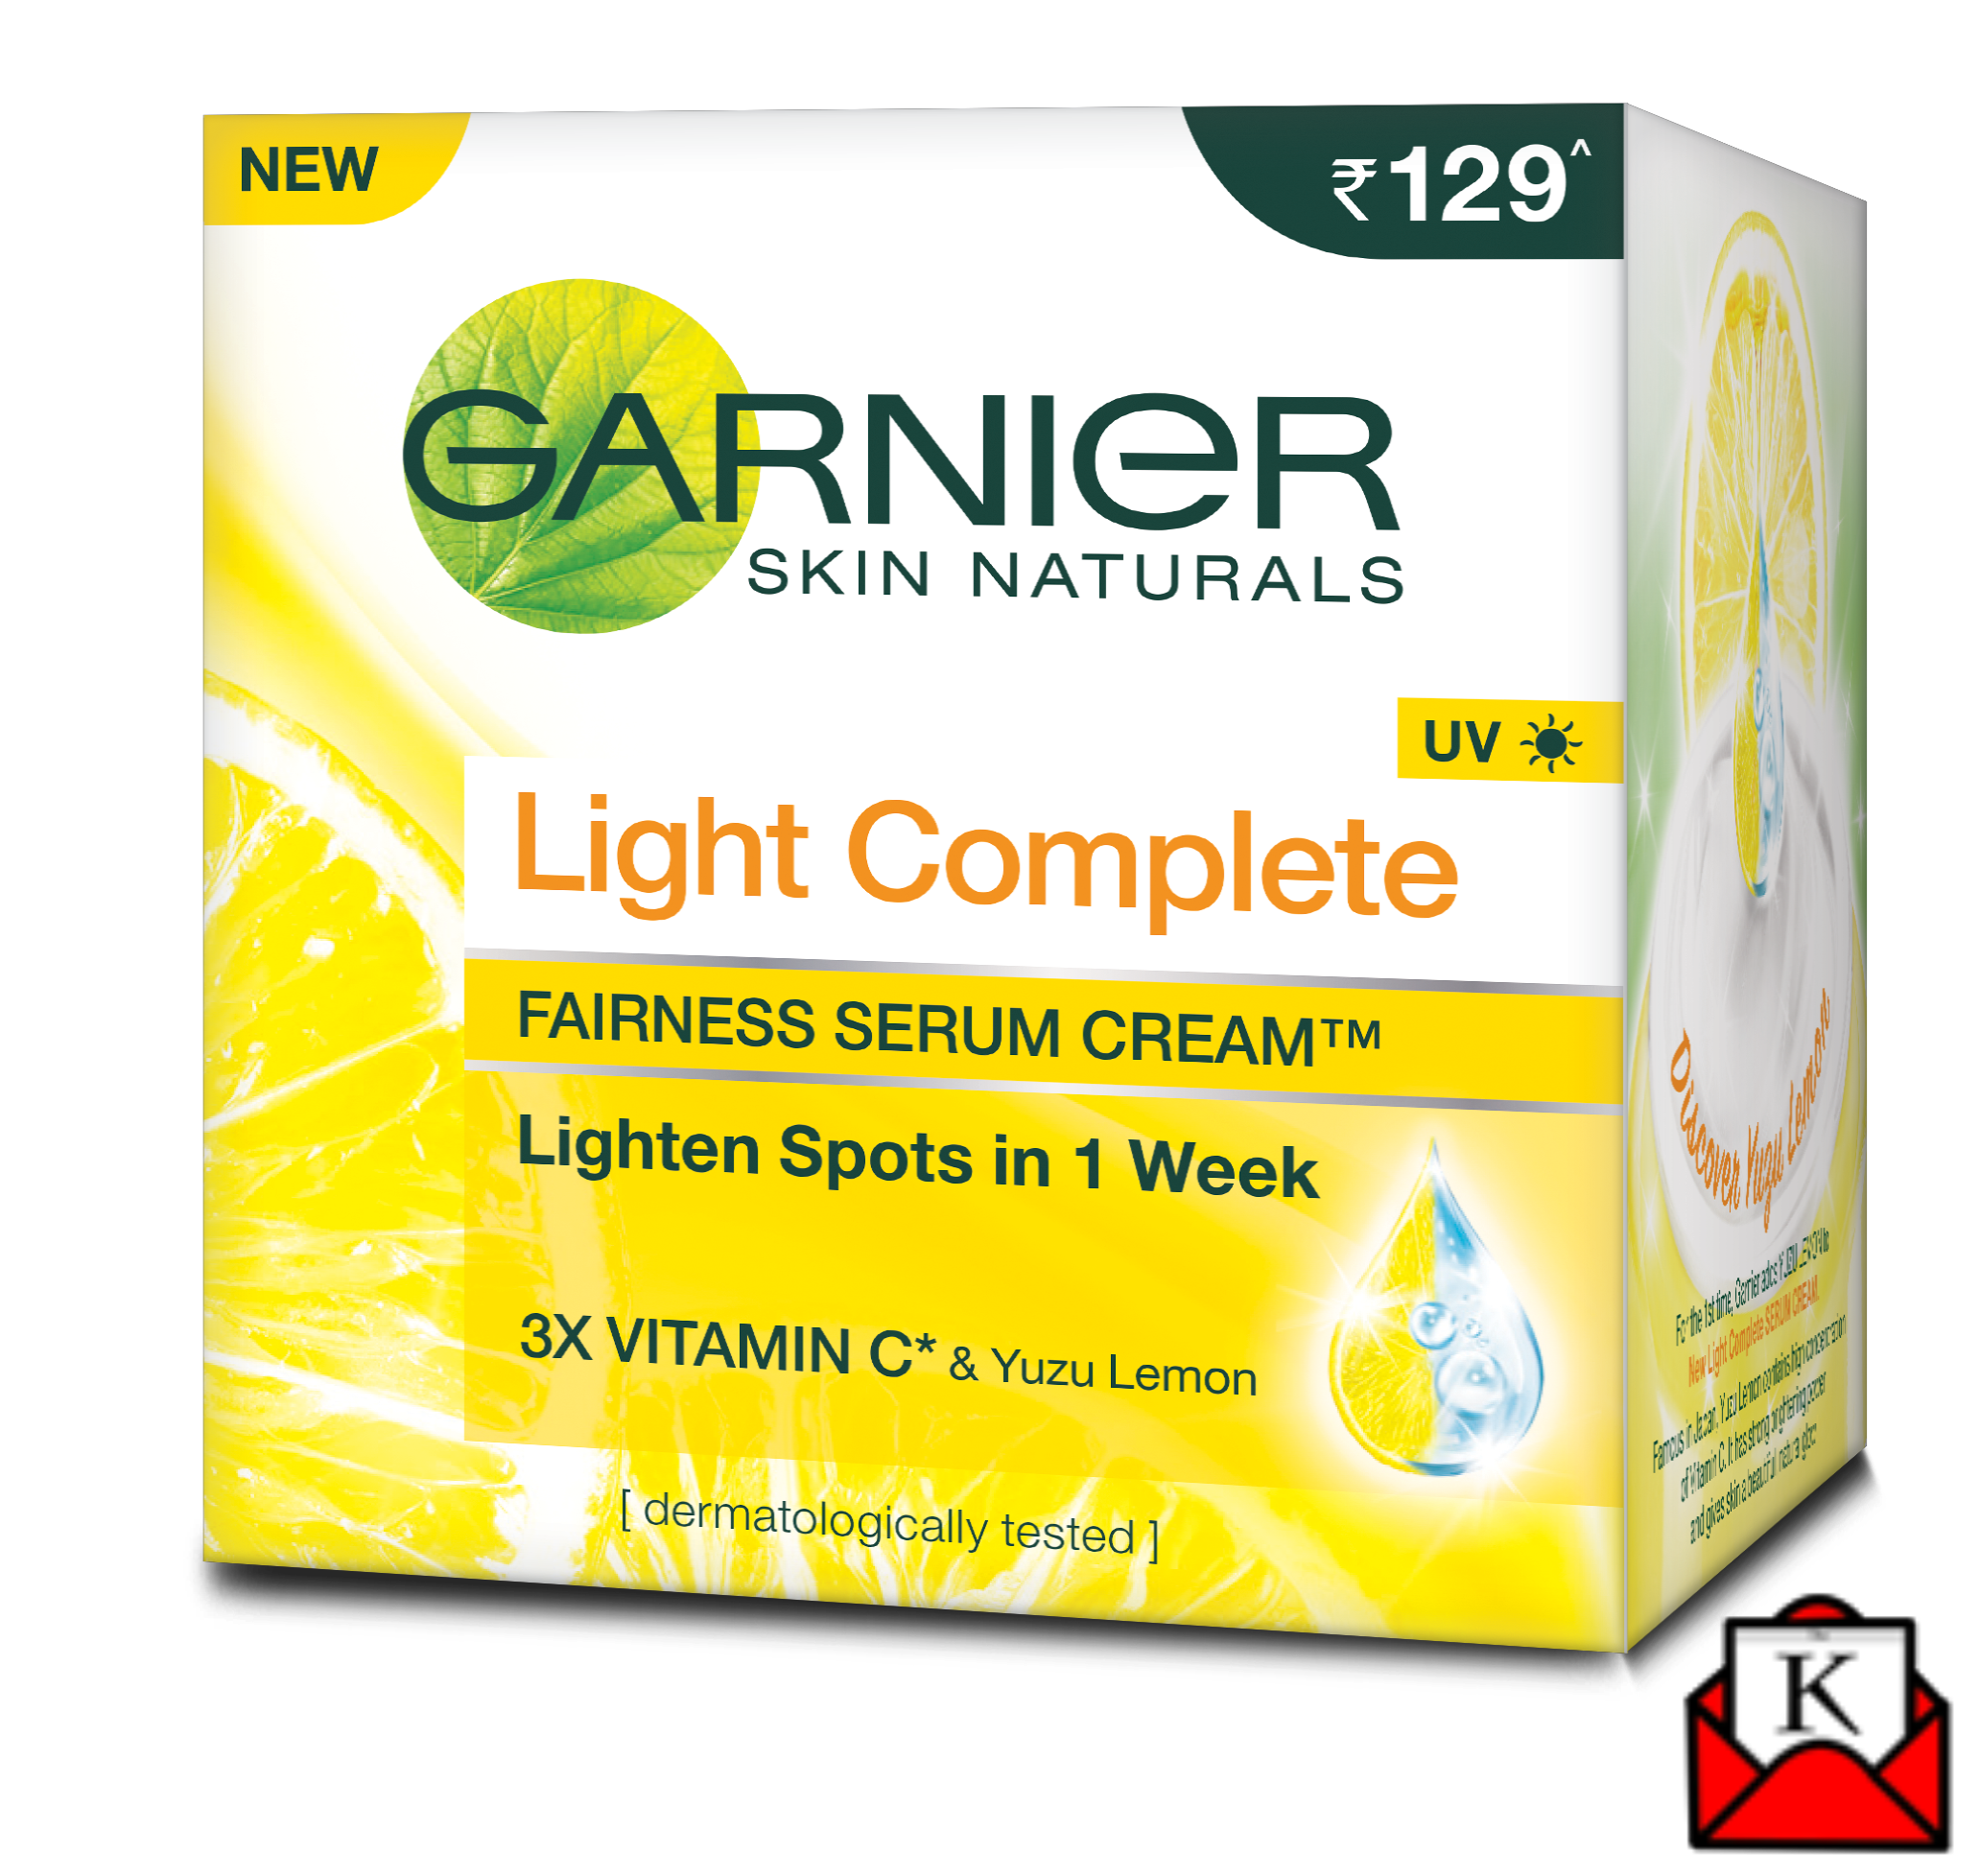 Reduce Spots and Look Radiant During Diwali With Garnier Light Complete UV